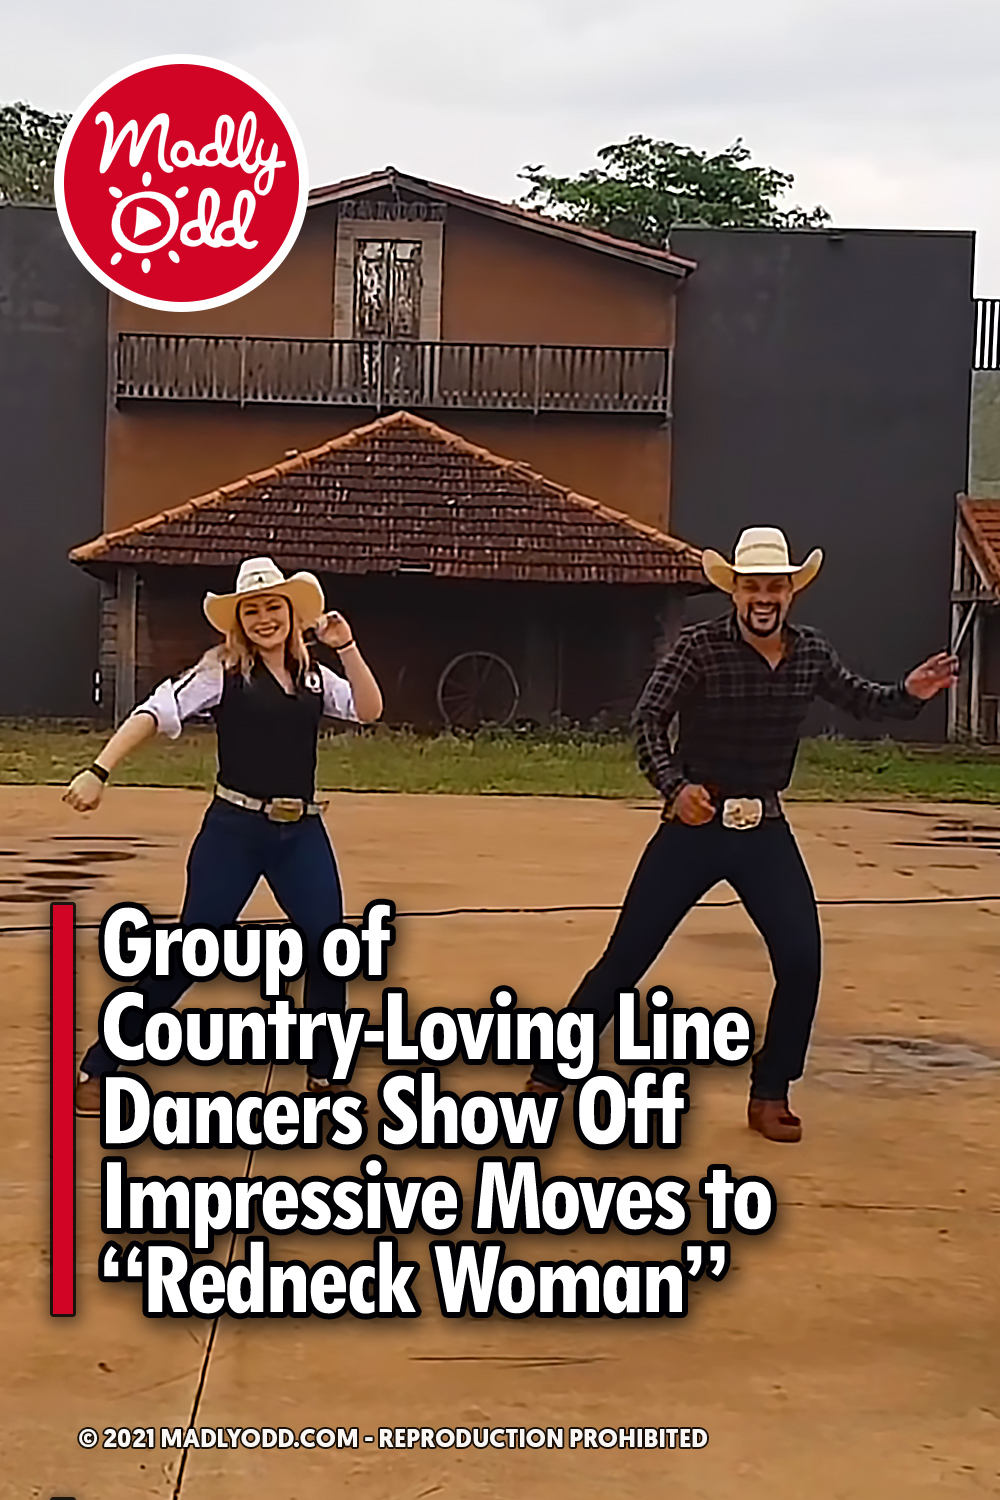 Group of Country-Loving Line Dancers Show Off Impressive Moves to “Redneck Woman”